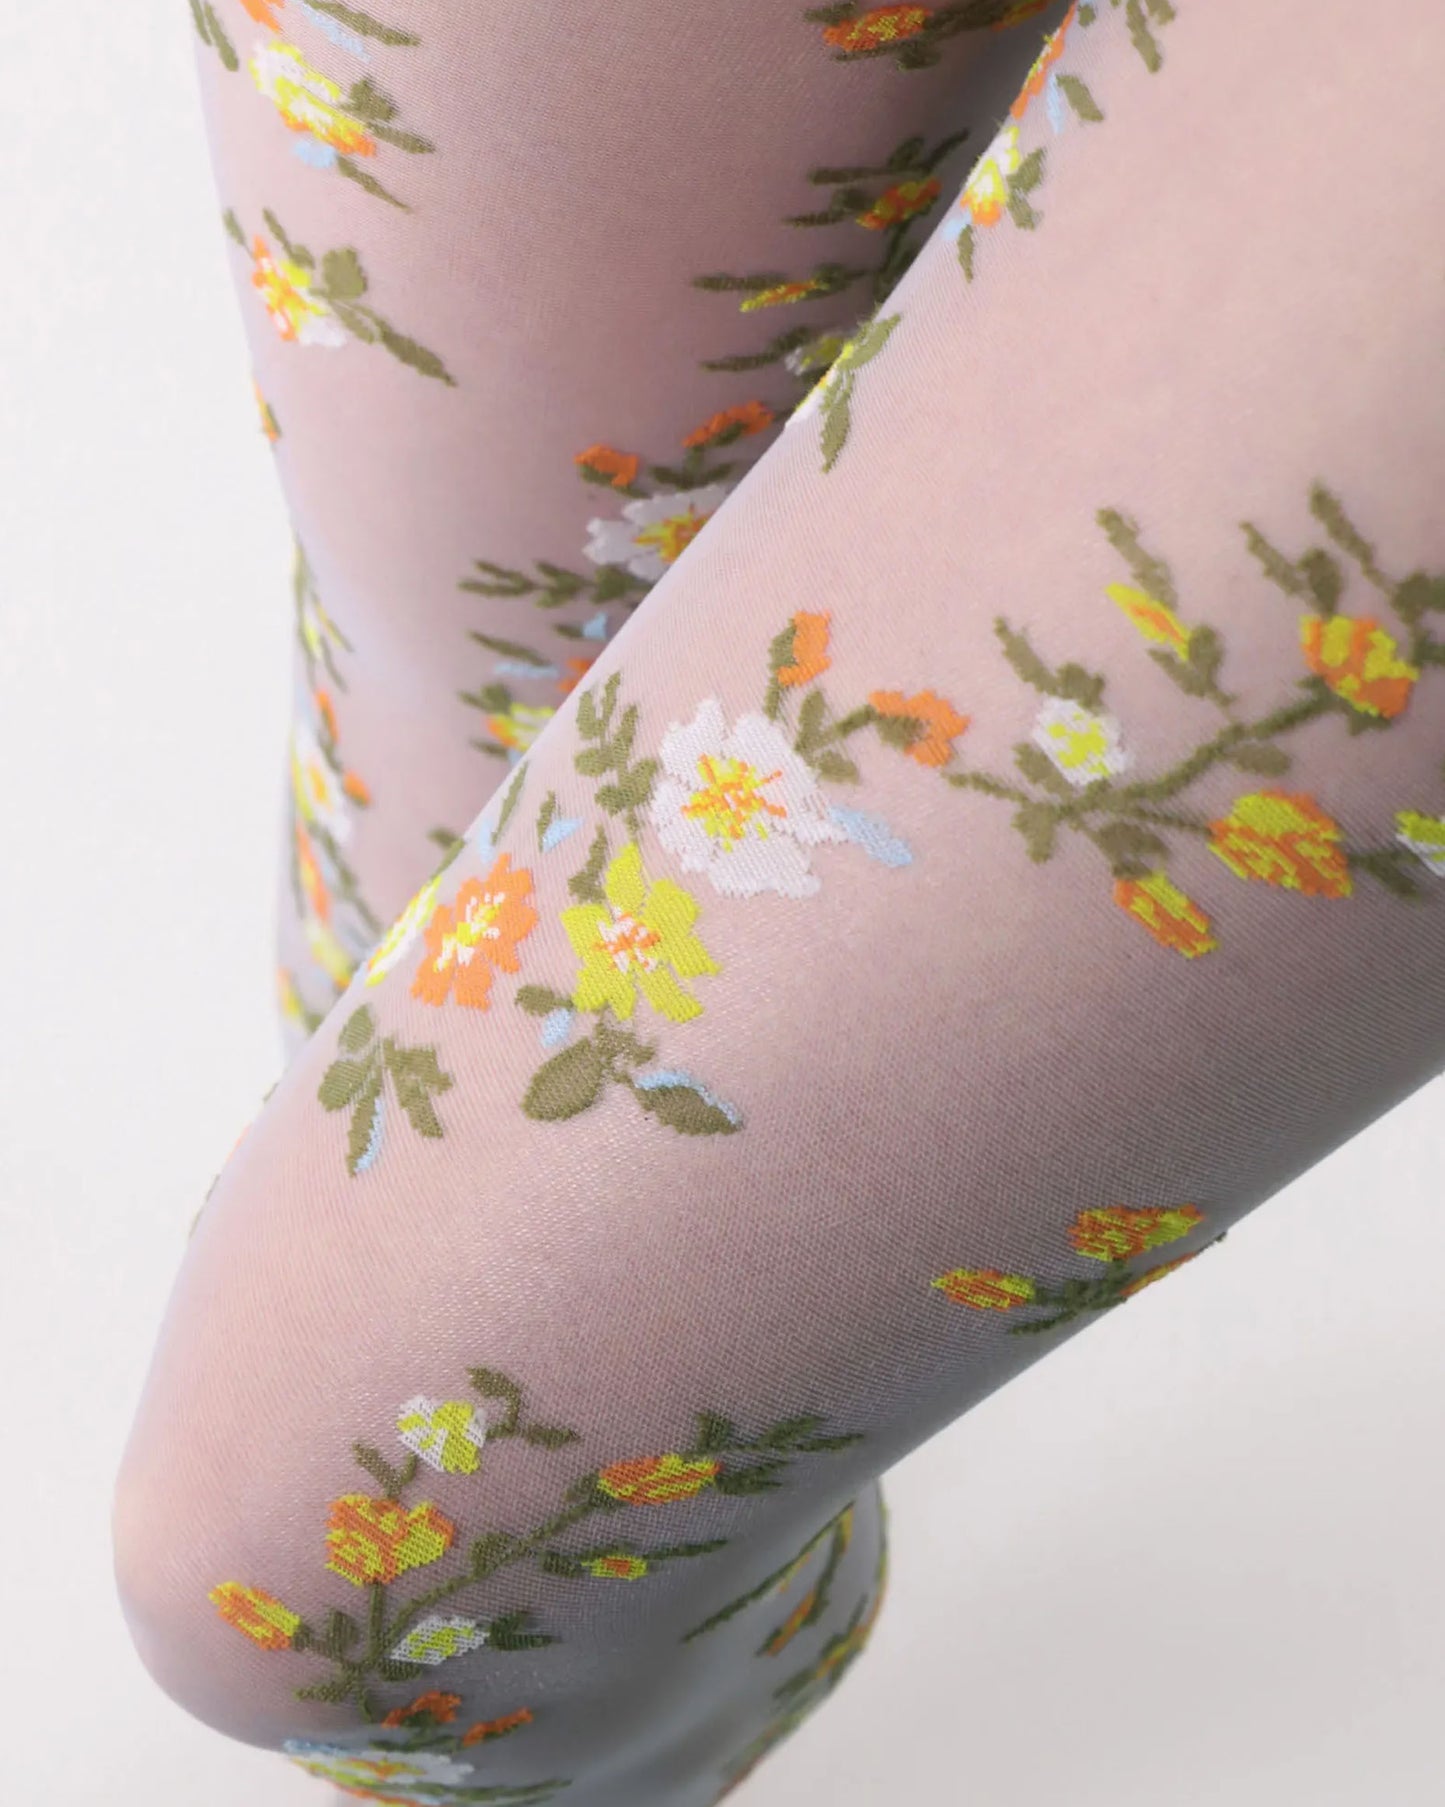 Oroblù Embroidery Collant - Sheer light blue fashion tights with a multicoloured woven floral pattern of orange, yellow, white and green.